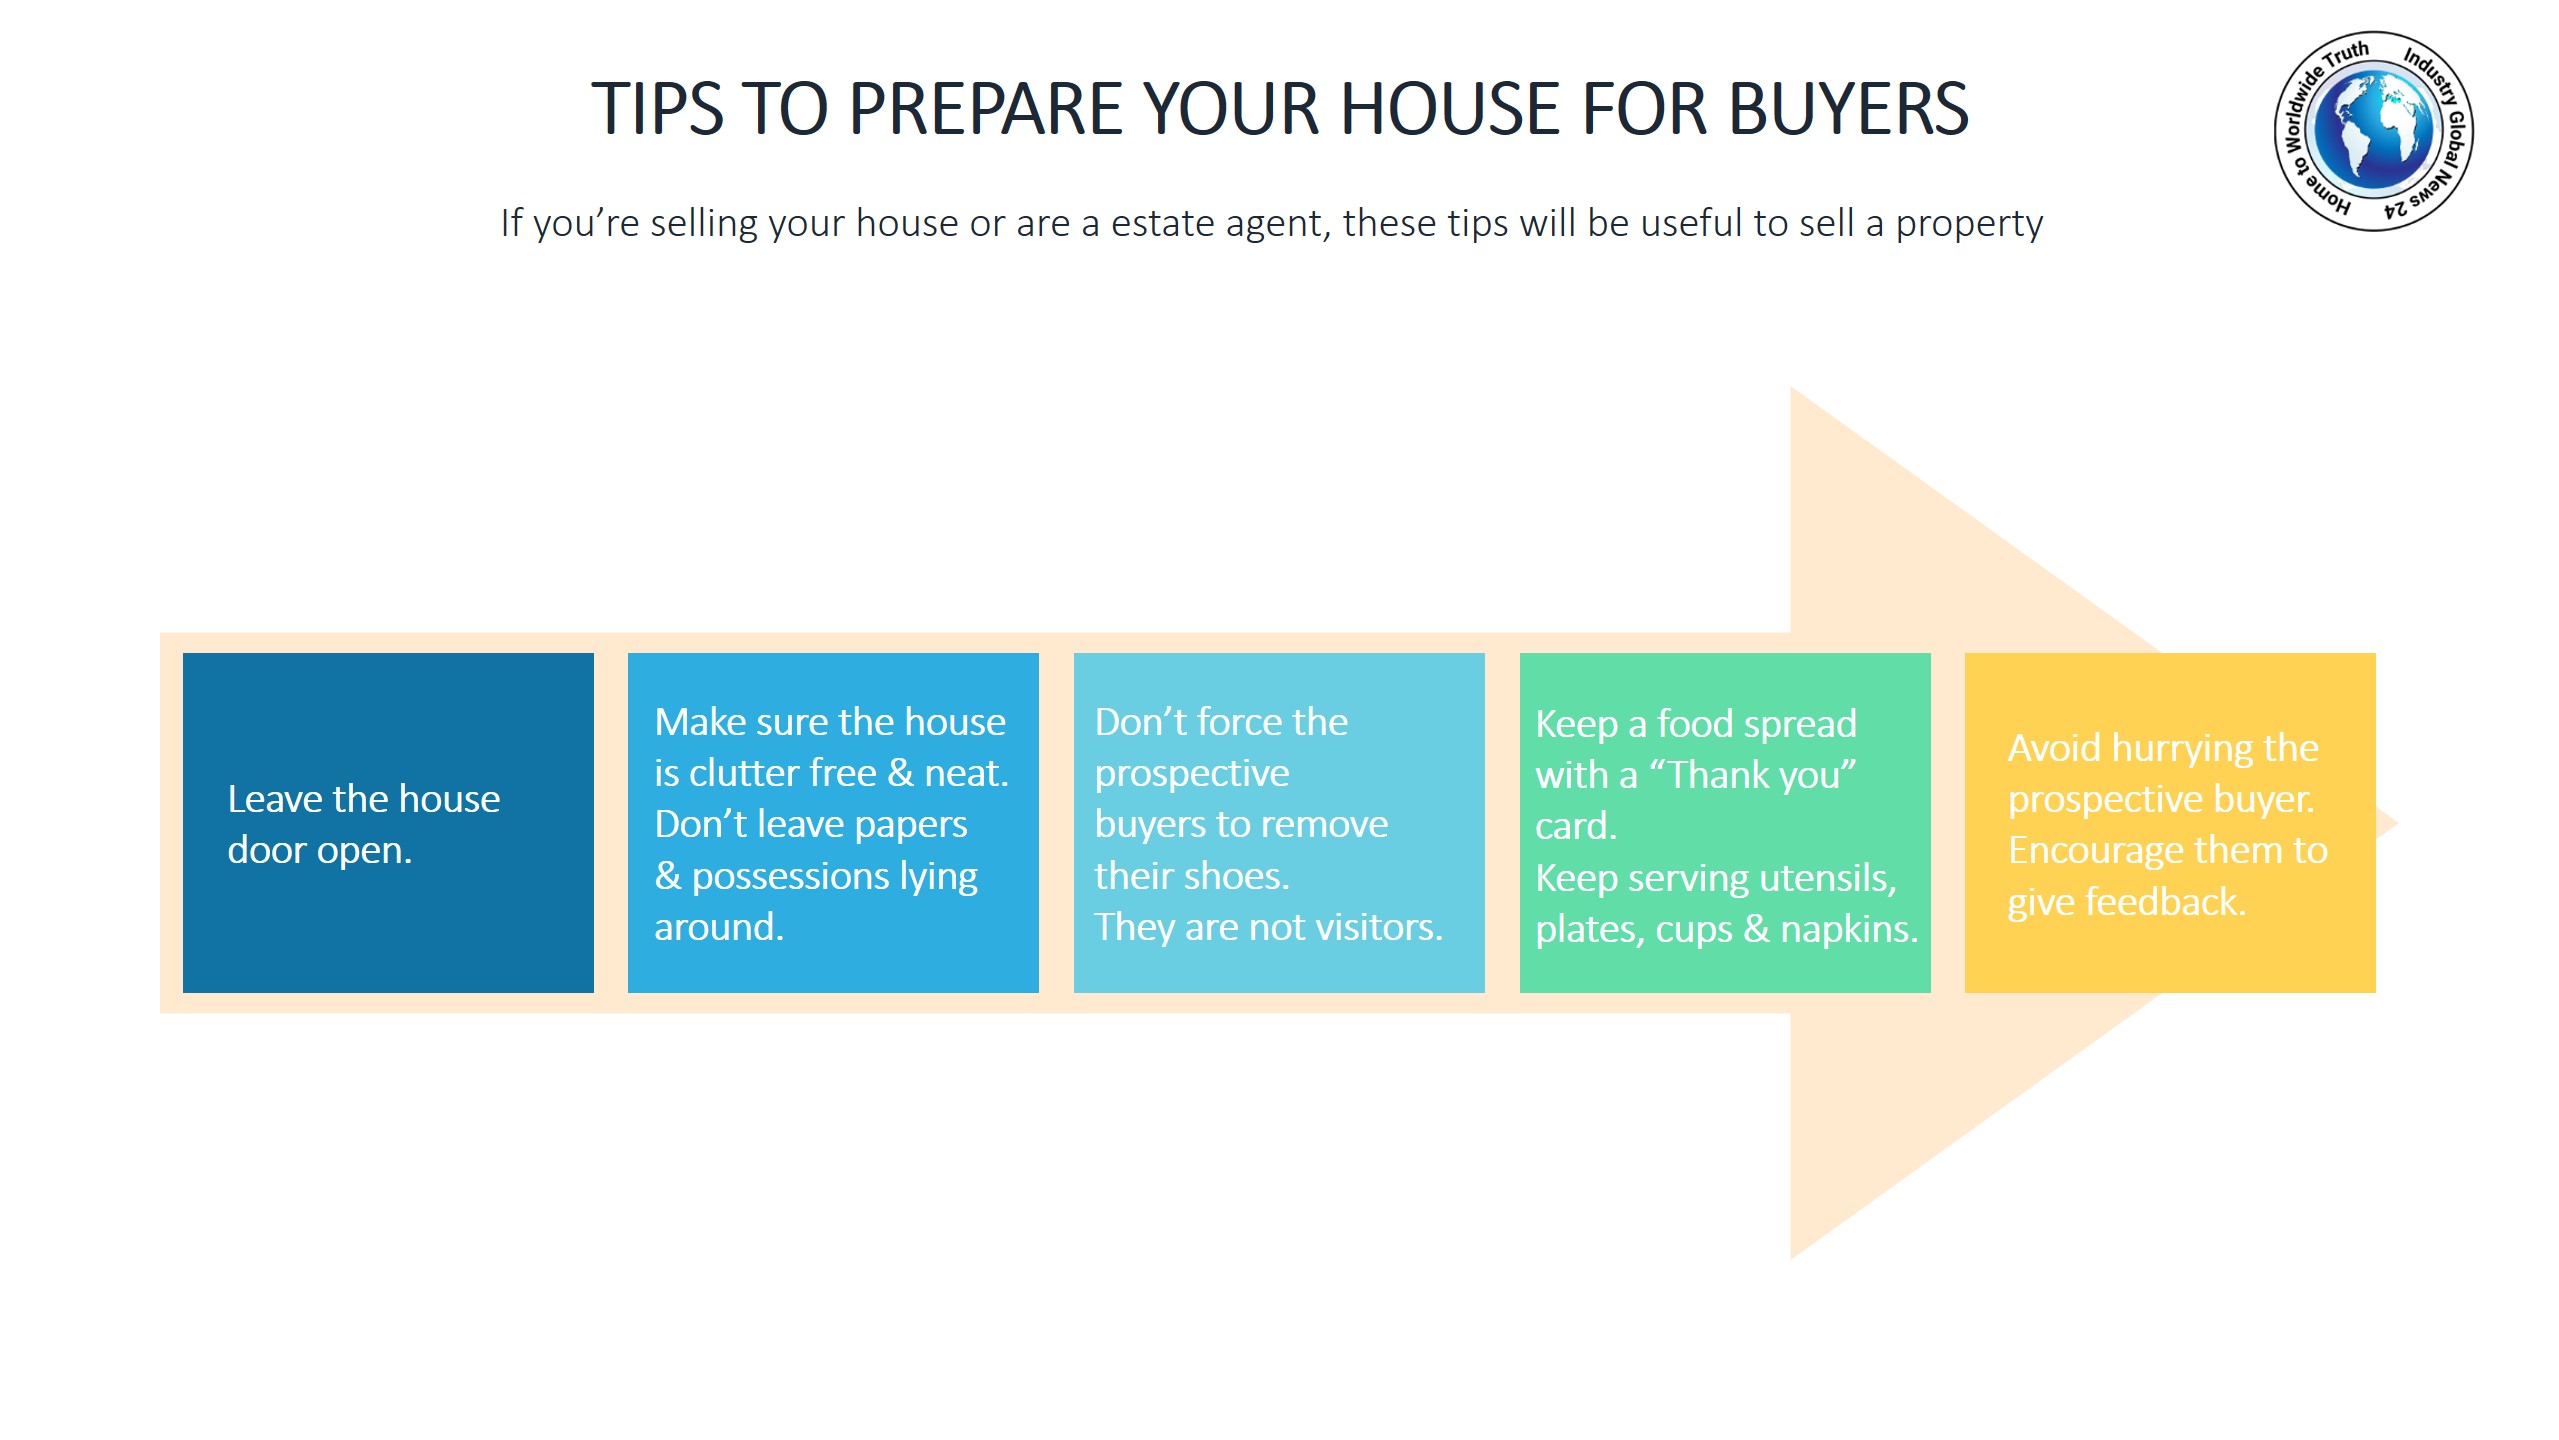 Tips to prepare your house for buyers